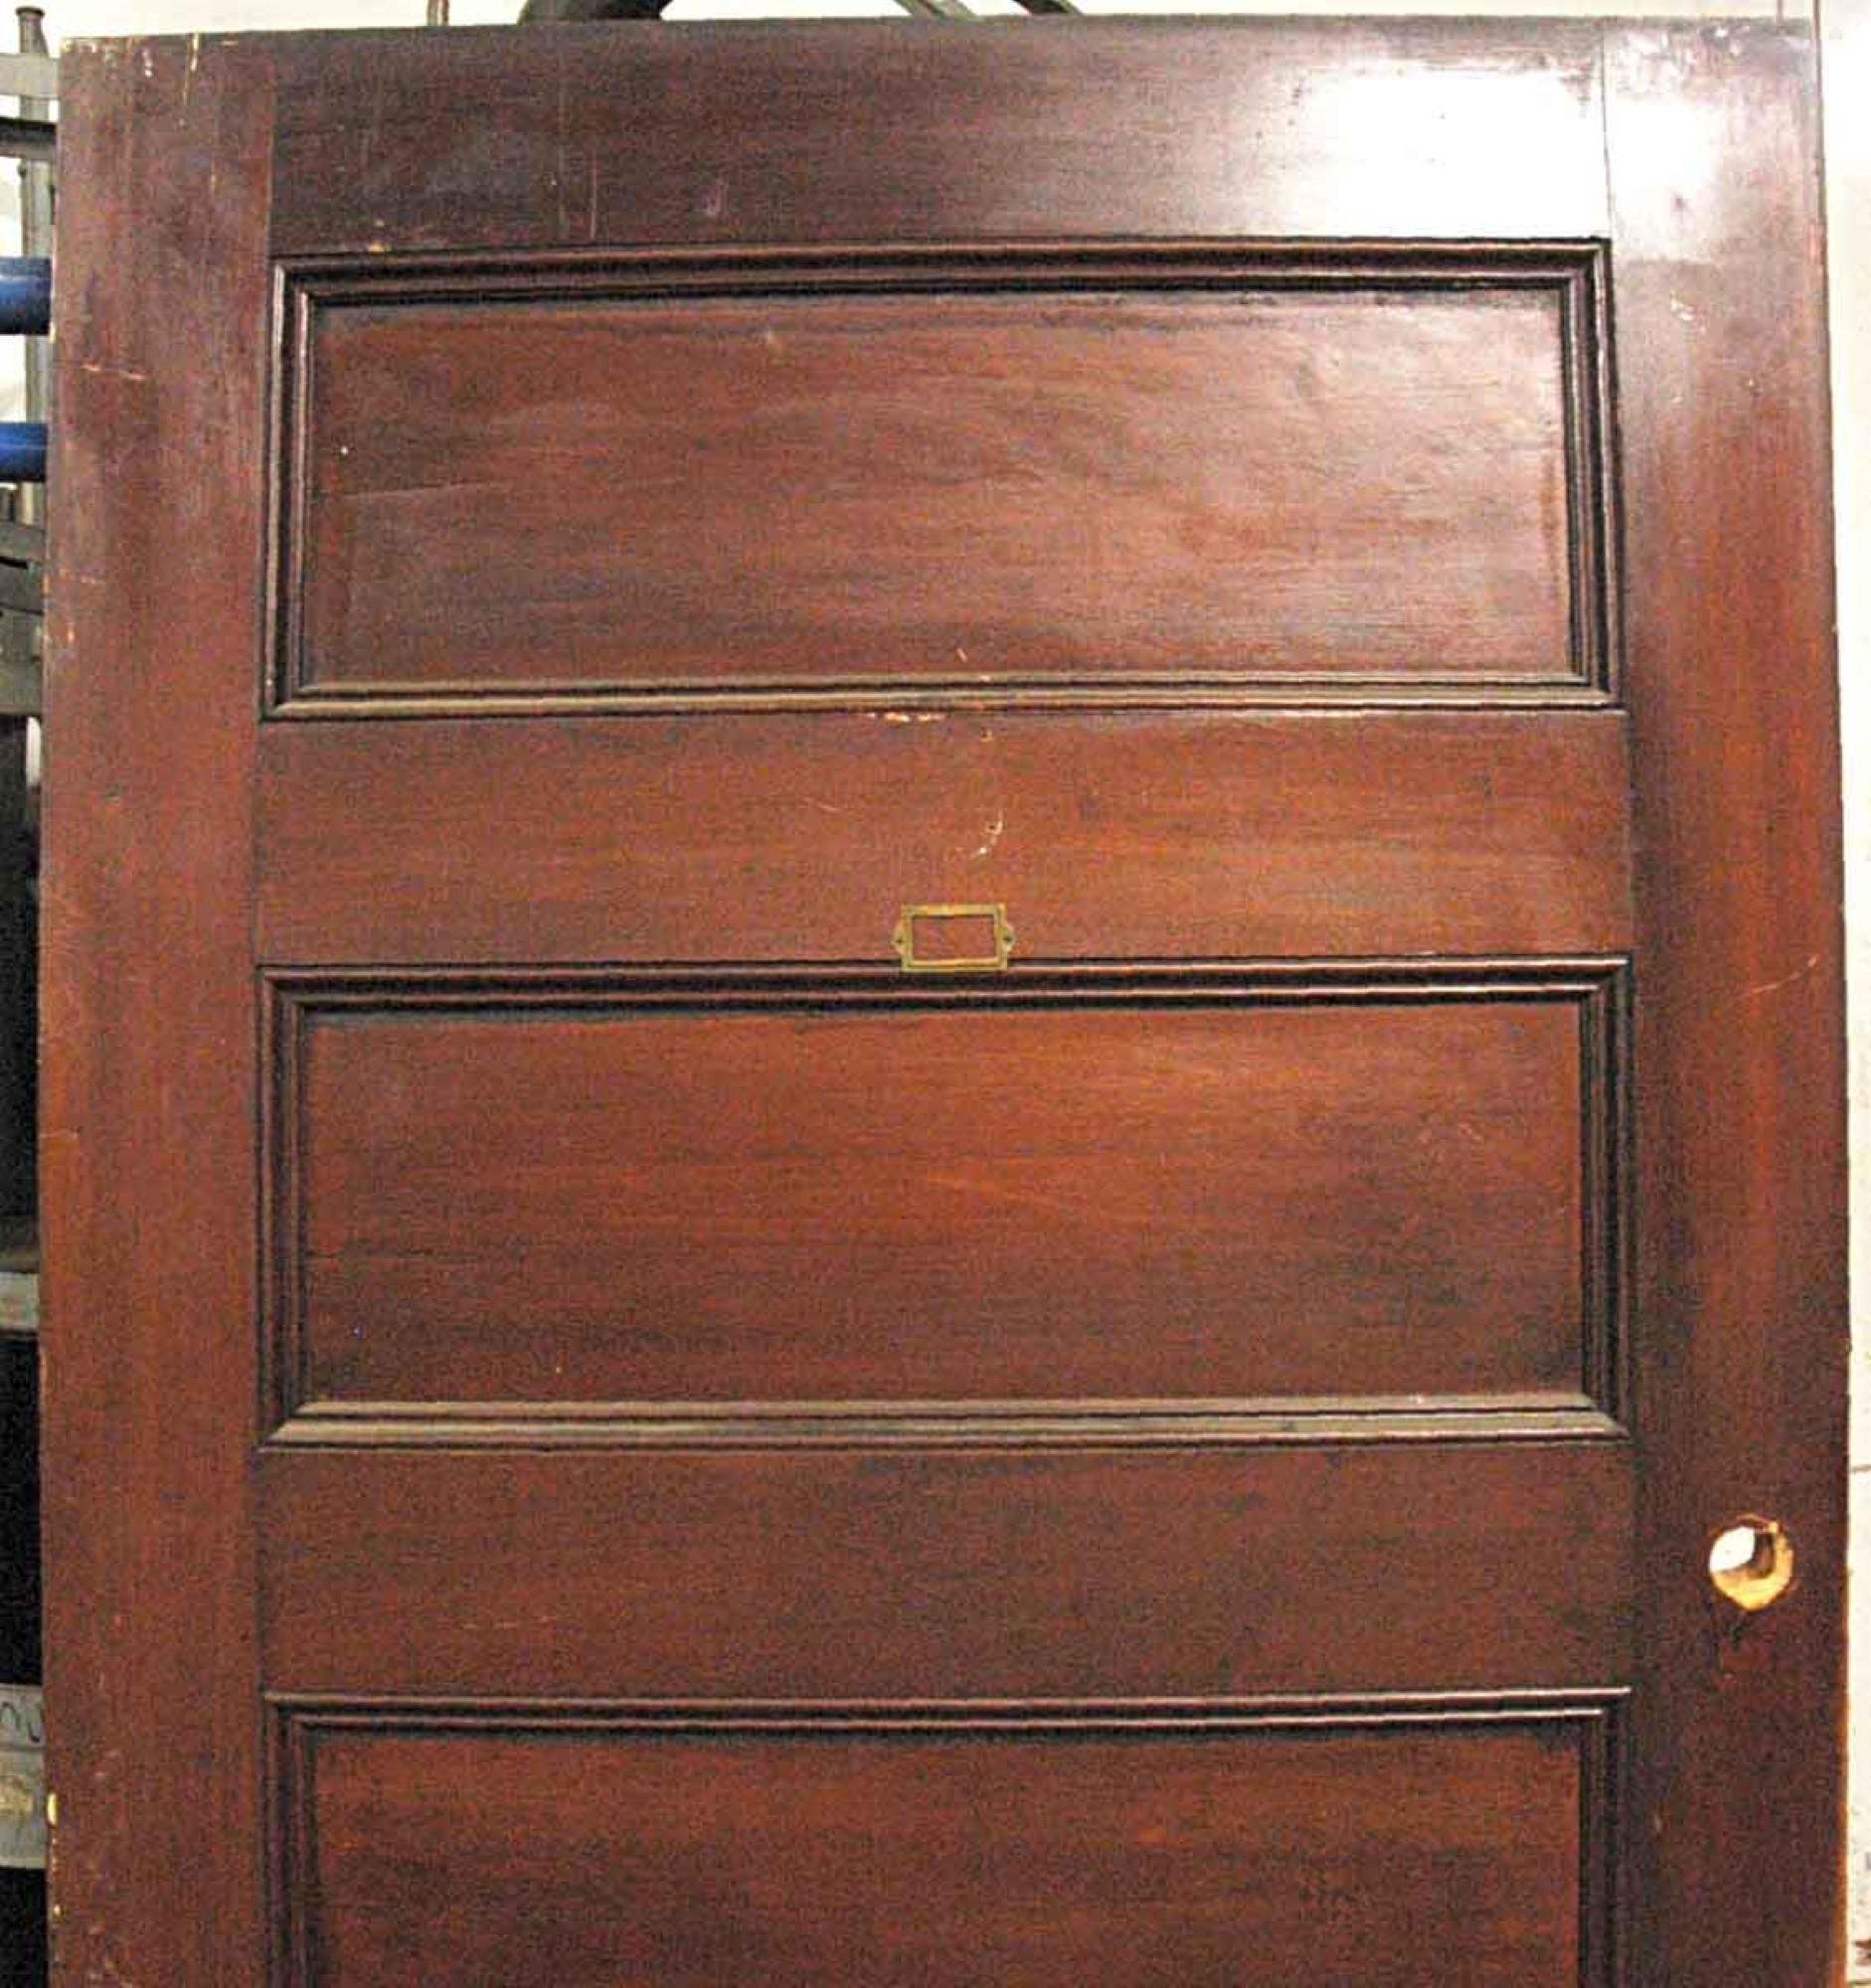 Solid core five panel door with a walnut veneer from the 1920s. Comes with attached escutcheons and a mortise lock. Minor scrapes and scratches. Once installed the door would swing inwardly towards the left. This can be seen at our 400 Gilligan St